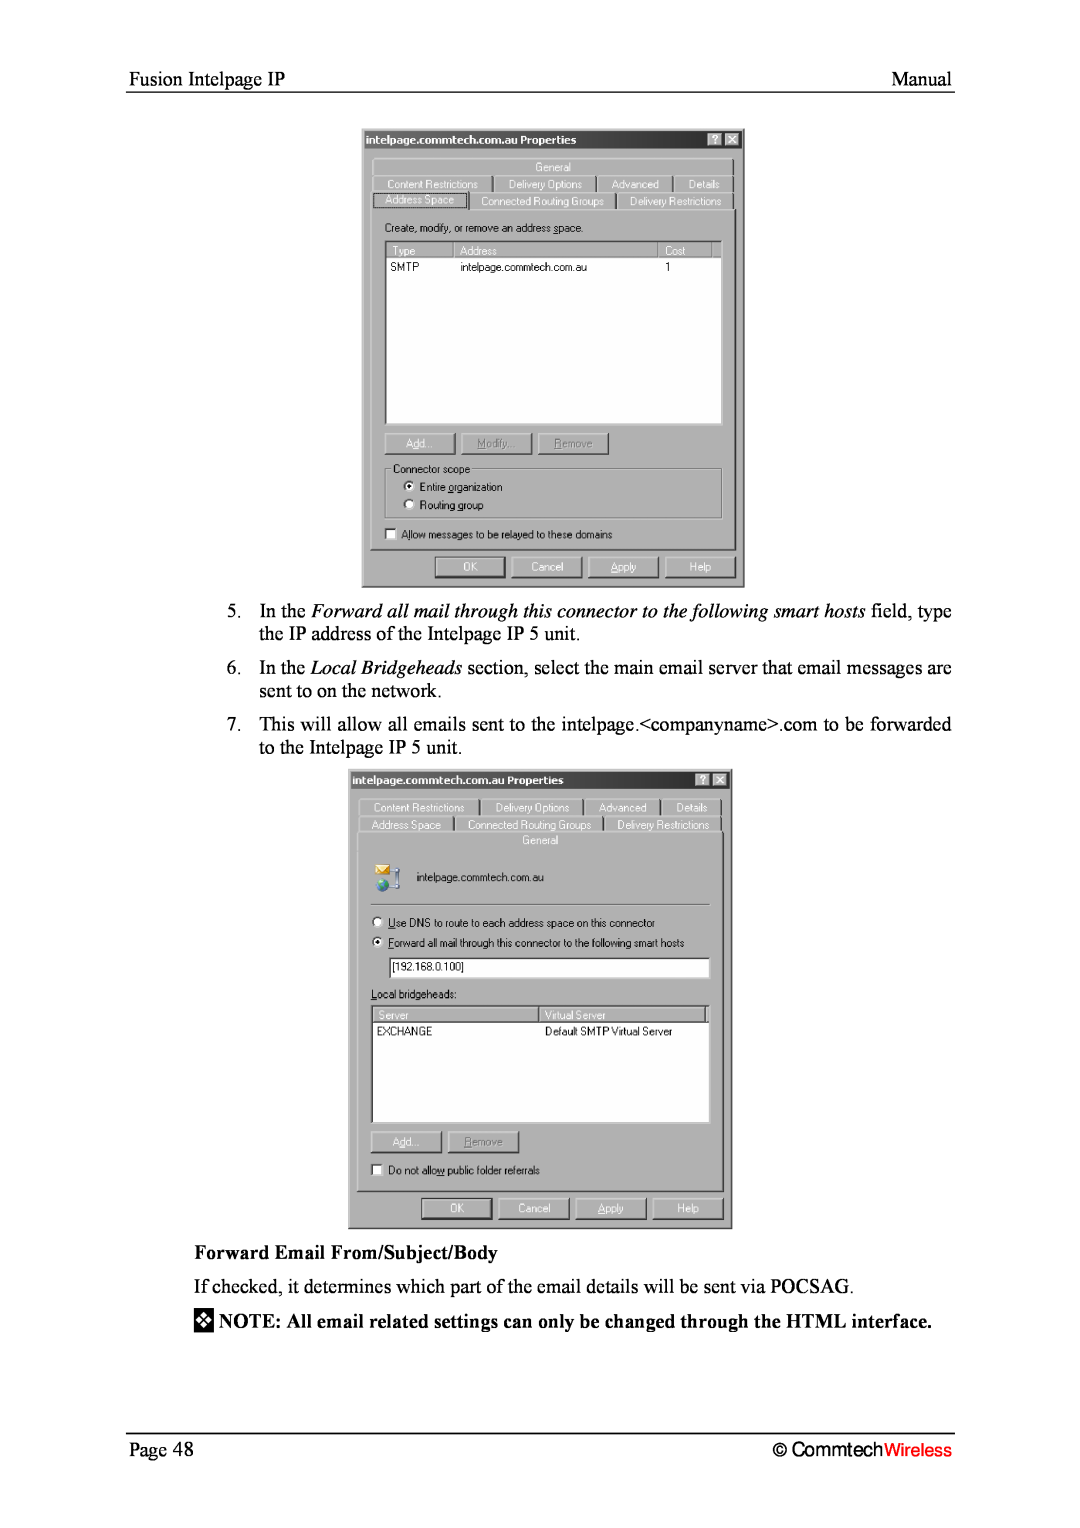 Fusion 2.1, INTELPage IP 5 manual Forward Email From/Subject/Body, CommtechWireless 